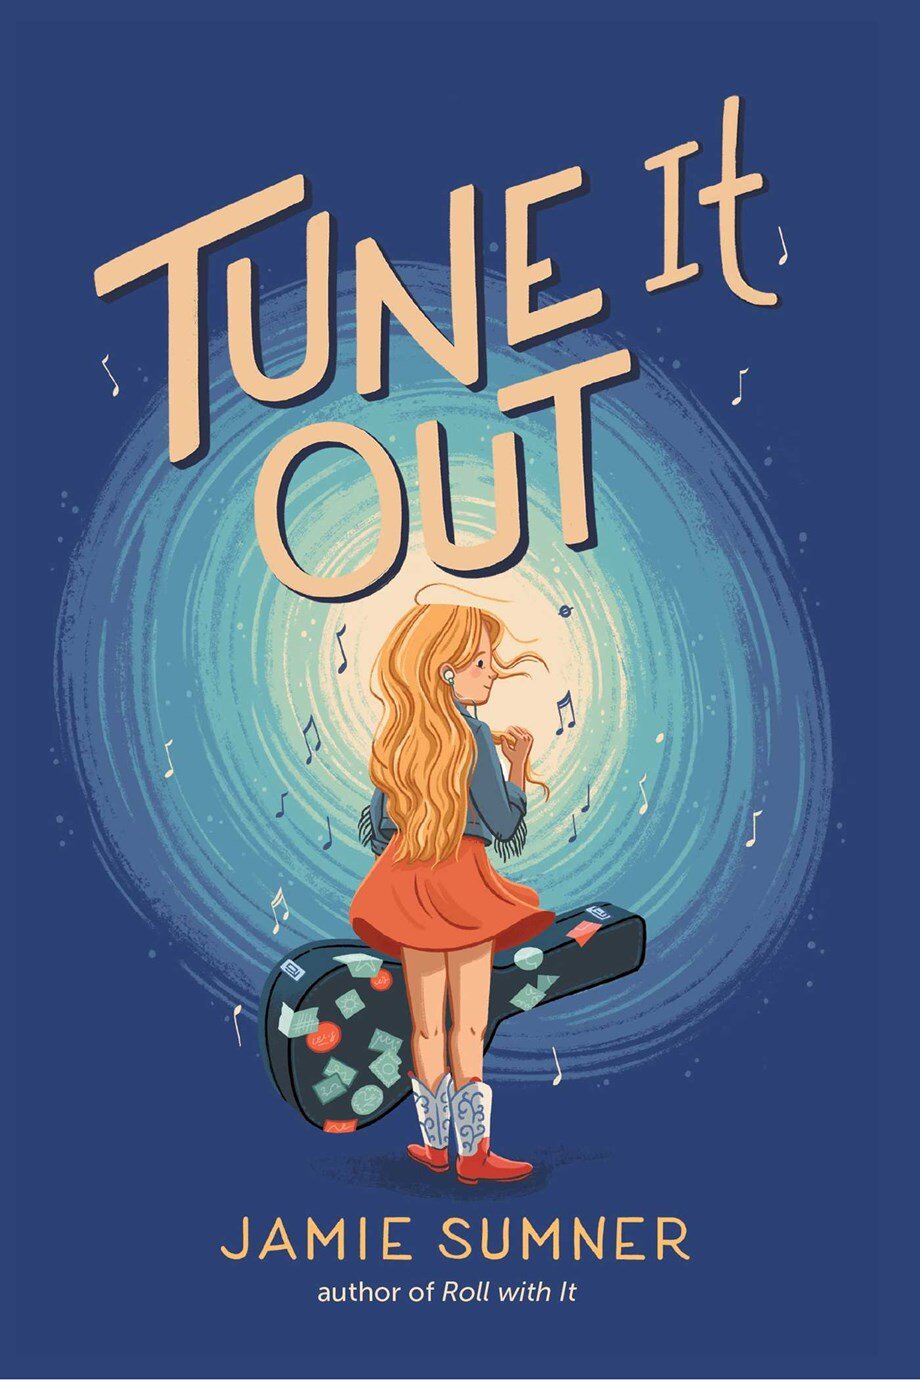   From the author of the acclaimed  Roll with It  comes a moving novel about a girl with a sensory processing disorder who has to find her own voice after her whole world turns upside down.   Lou Montgomery has the voice of an angel, or so her mother